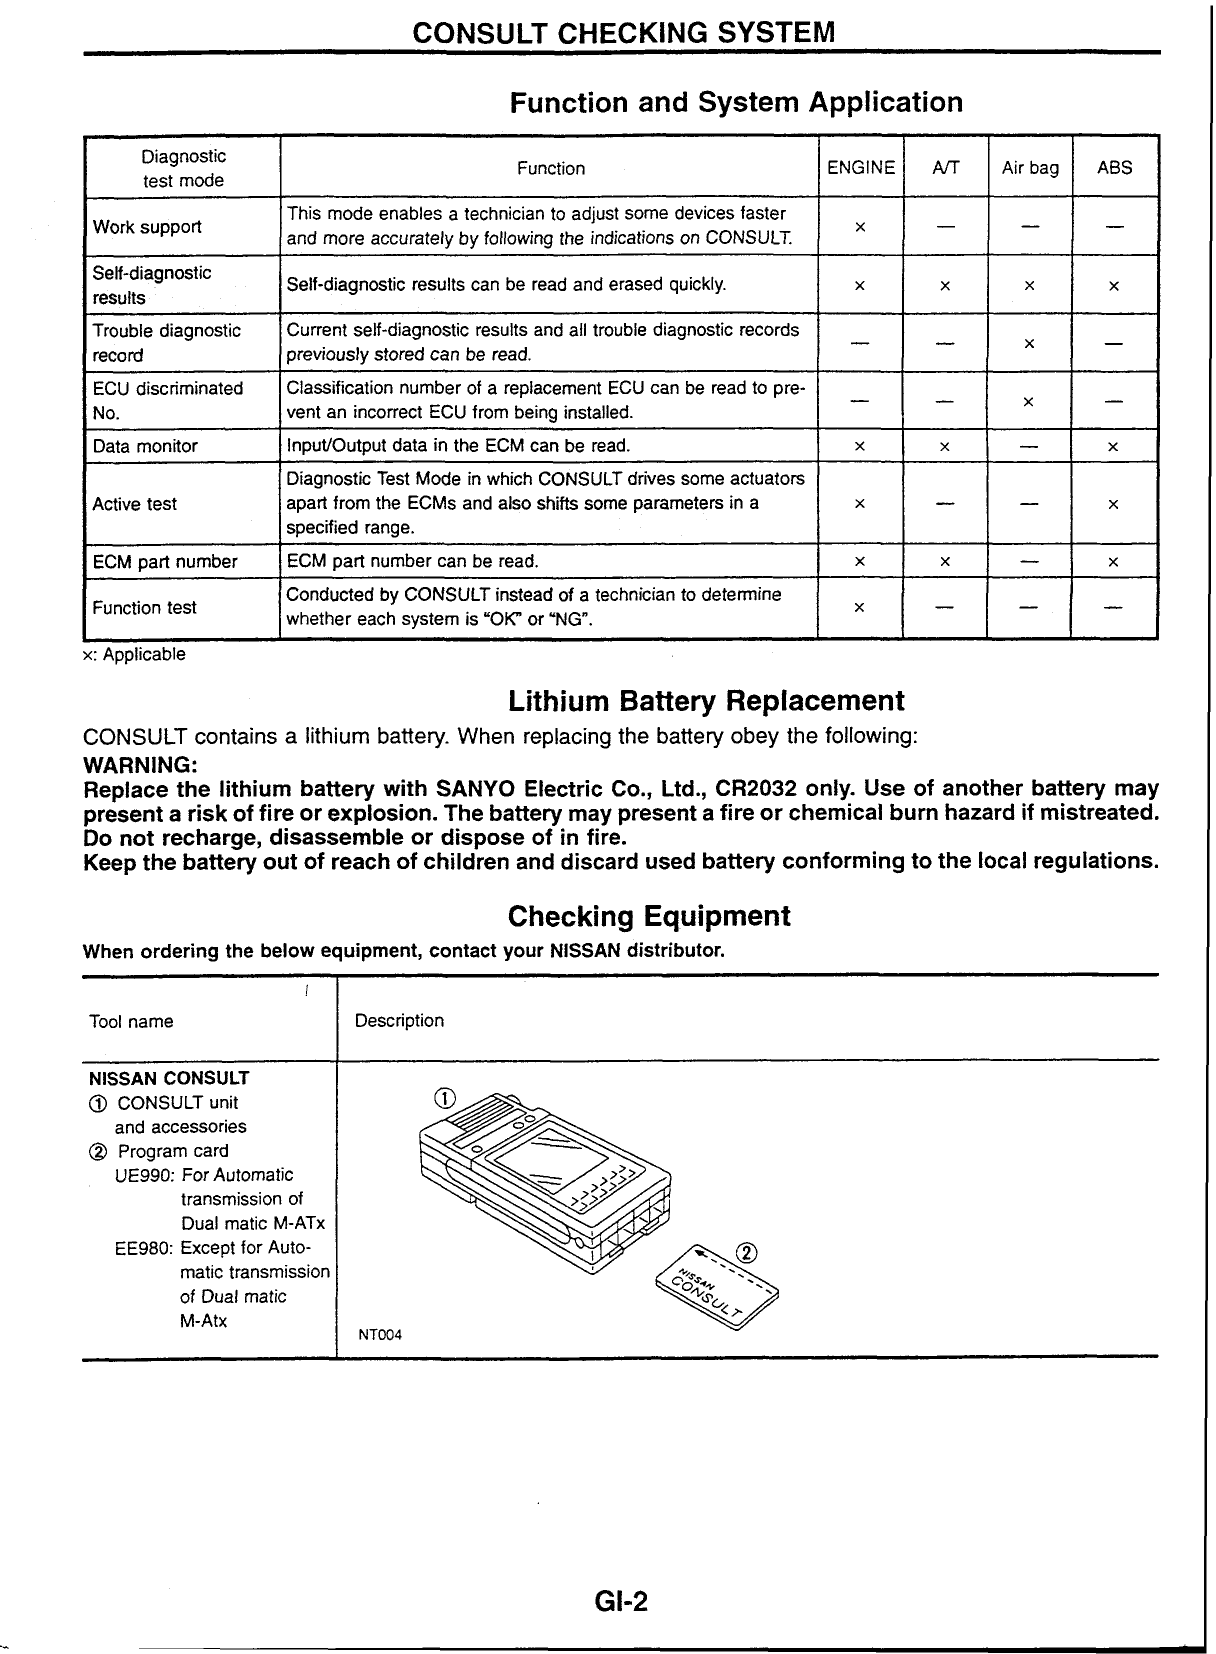 1998-2002 Nissan Skyline R34 service manual Preview image 5